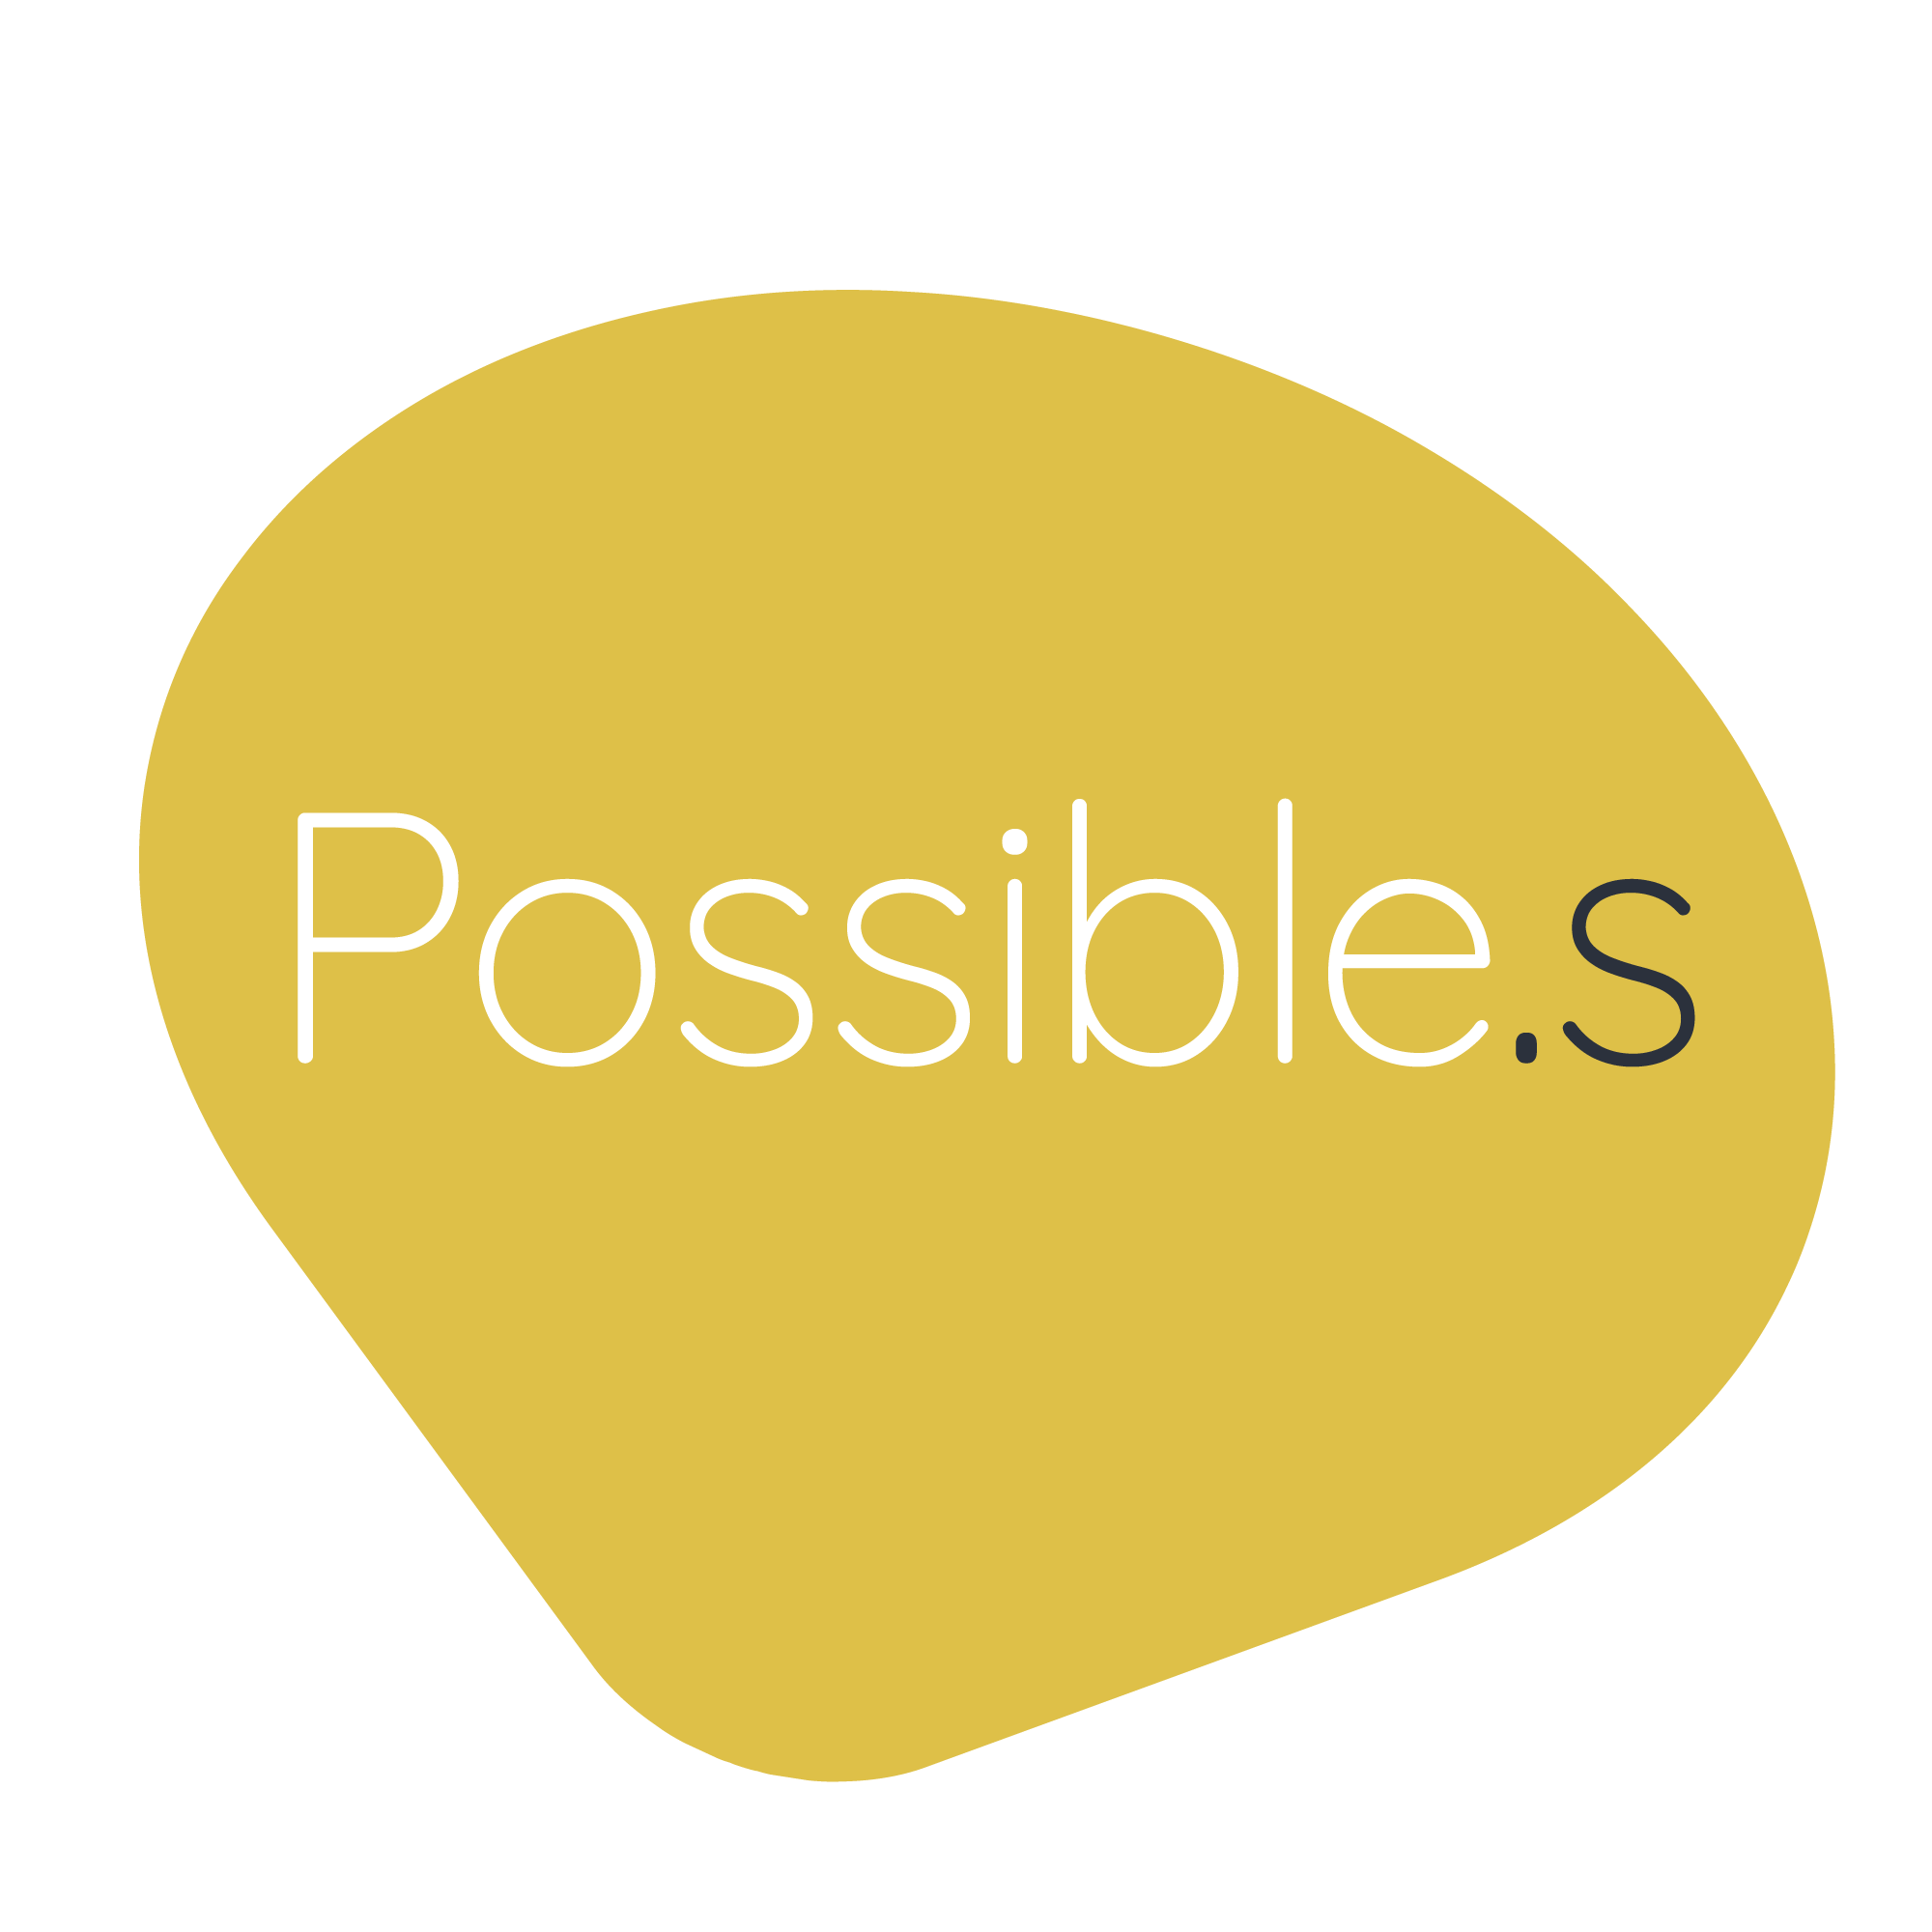 Possible.s